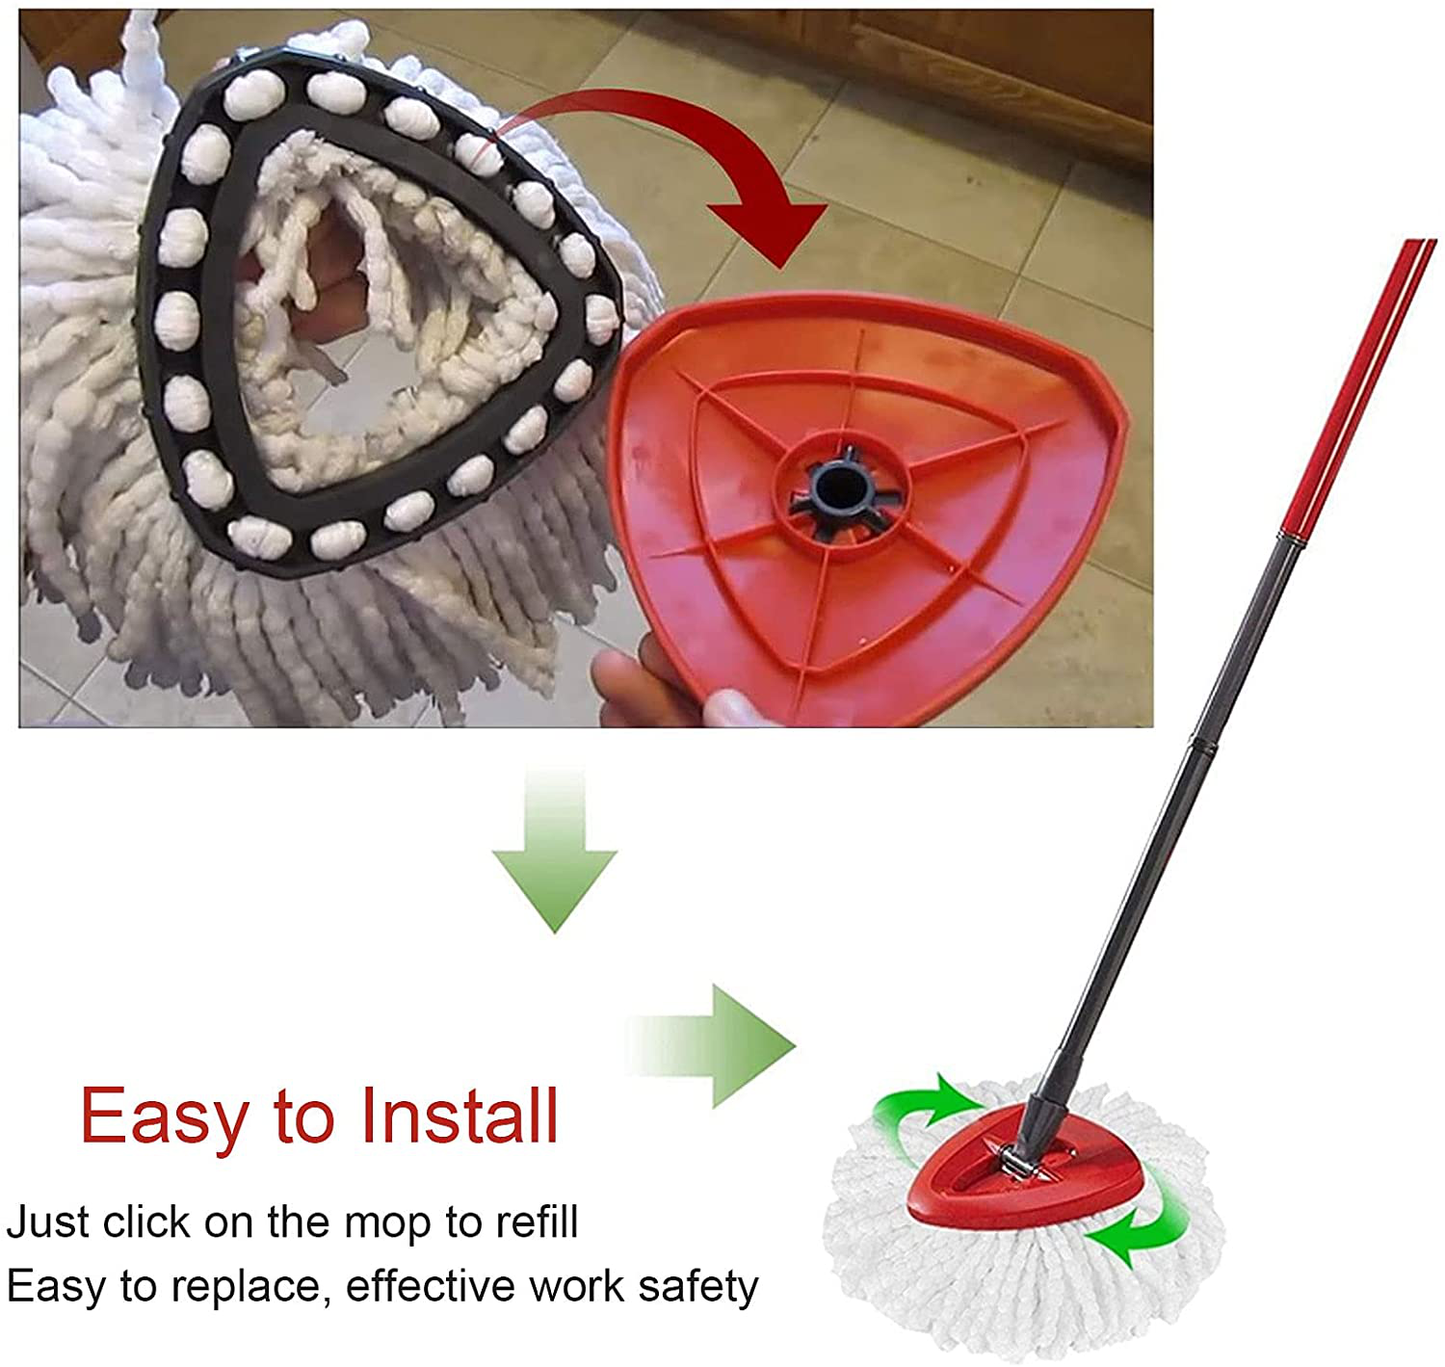 Carkio 4PCS Replacement Microfiber Spin Mop Head Refills Compatible with O-Cedar EasyWring Mop